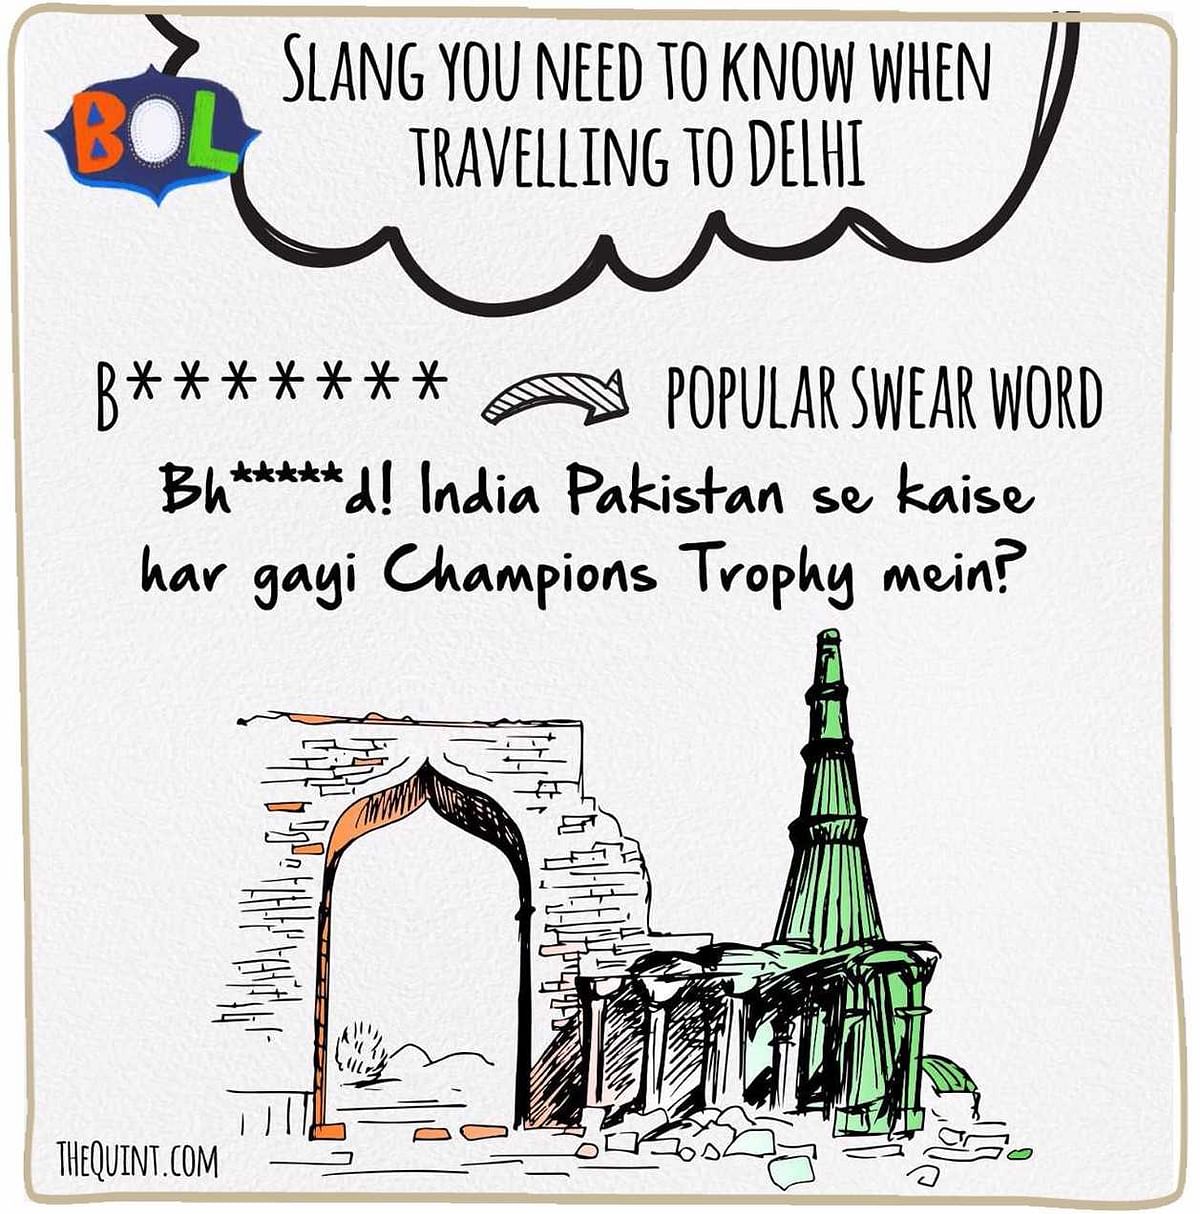 Don’t be a chomu and brush up your Delhiwala lingo!